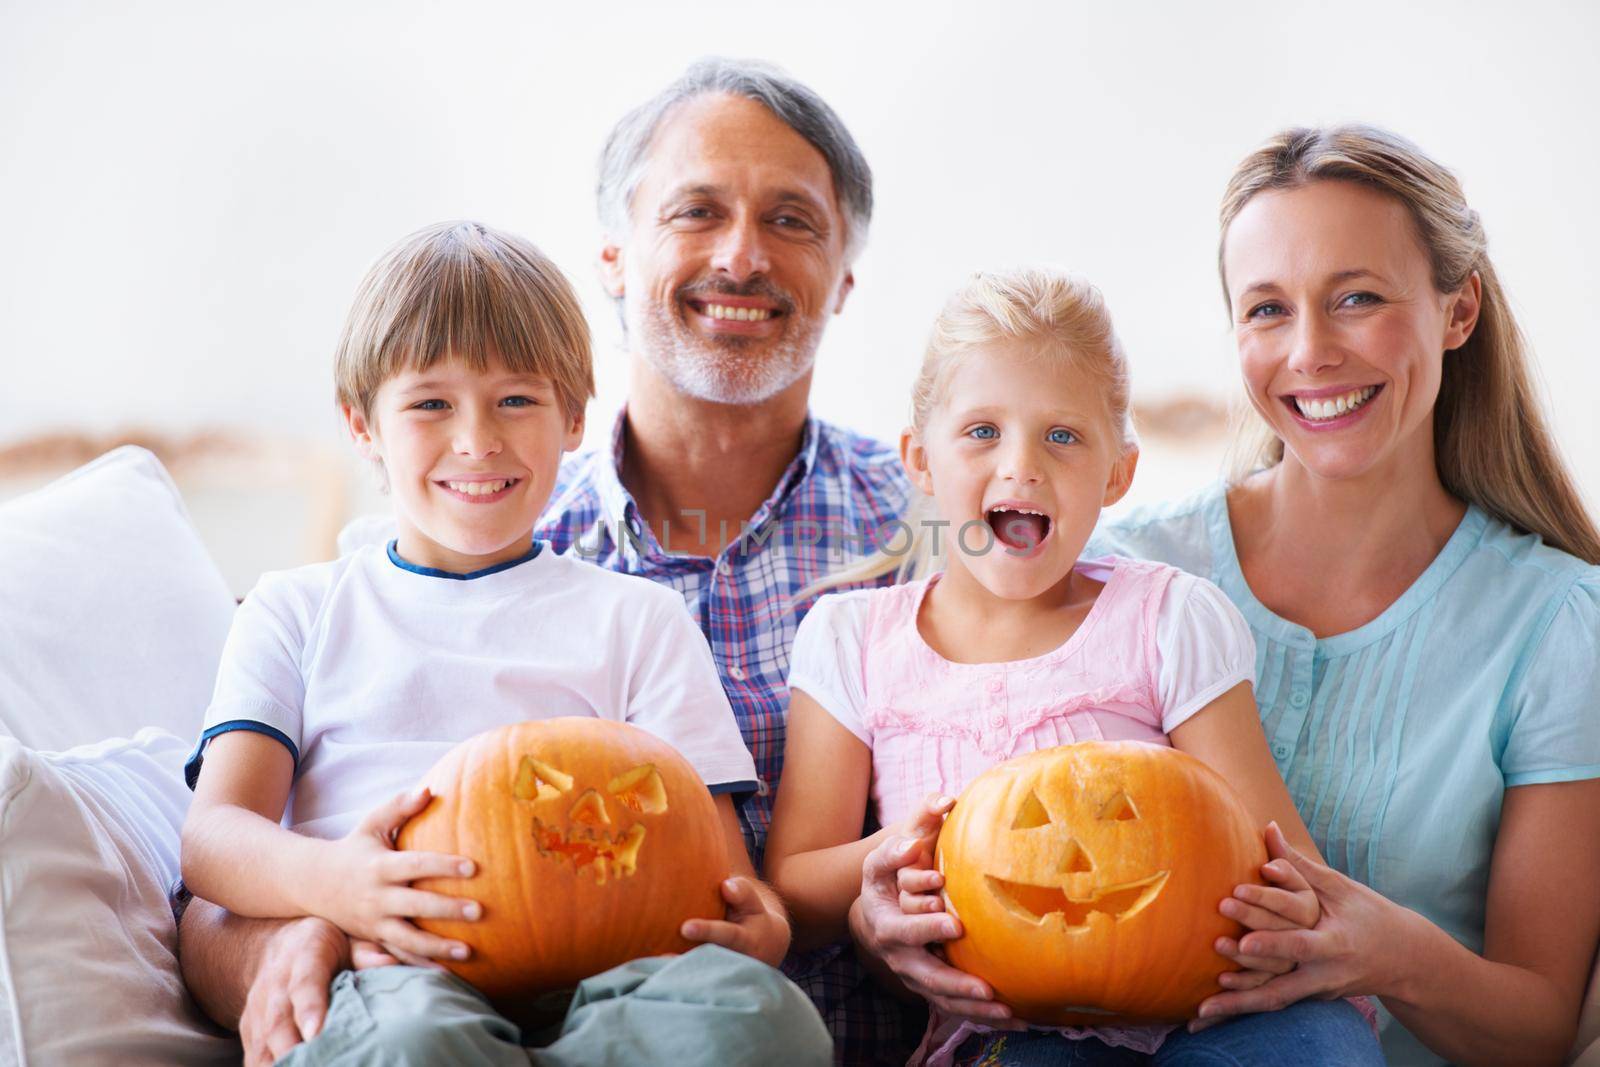 Portrait of a family of four showing you their carved pumpkins.